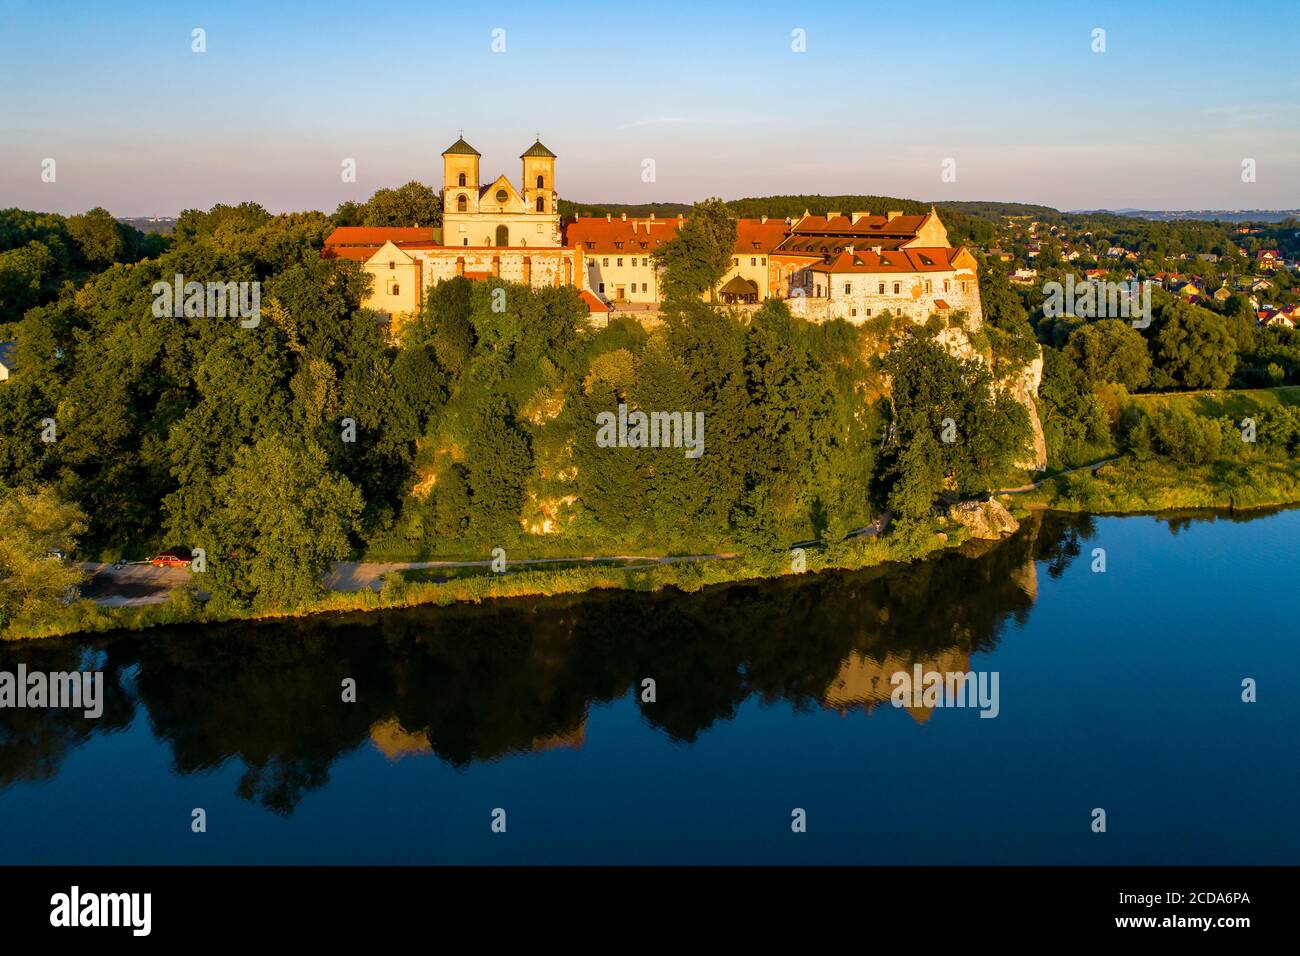 Tyniec near Krakow, Poland. Benedictine abbey on the rocky cliff and its reflection in Vistula River. Aerial view in summer in sunset light Stock Photo